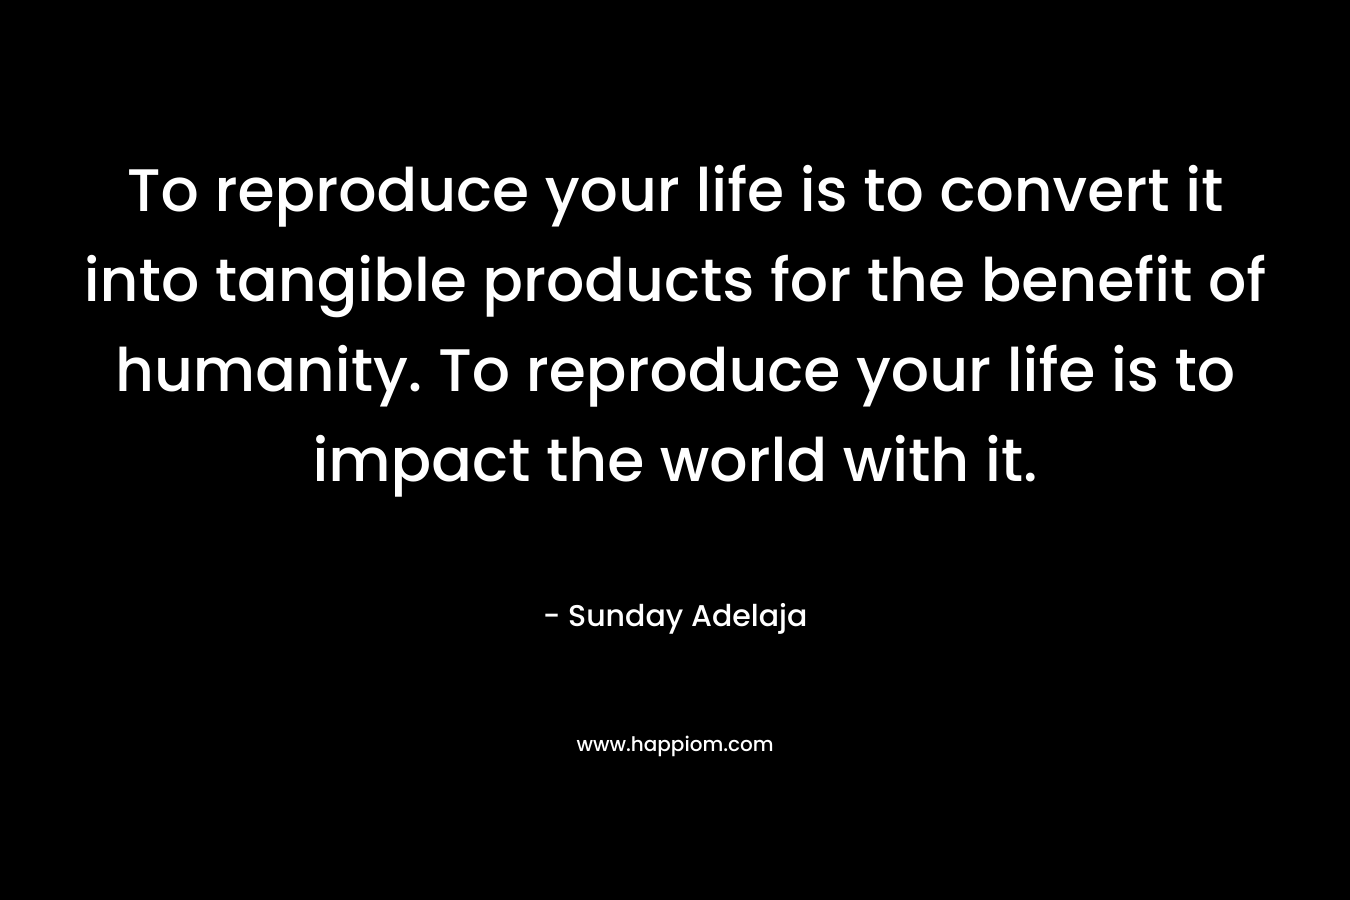 To reproduce your life is to convert it into tangible products for the benefit of humanity. To reproduce your life is to impact the world with it.